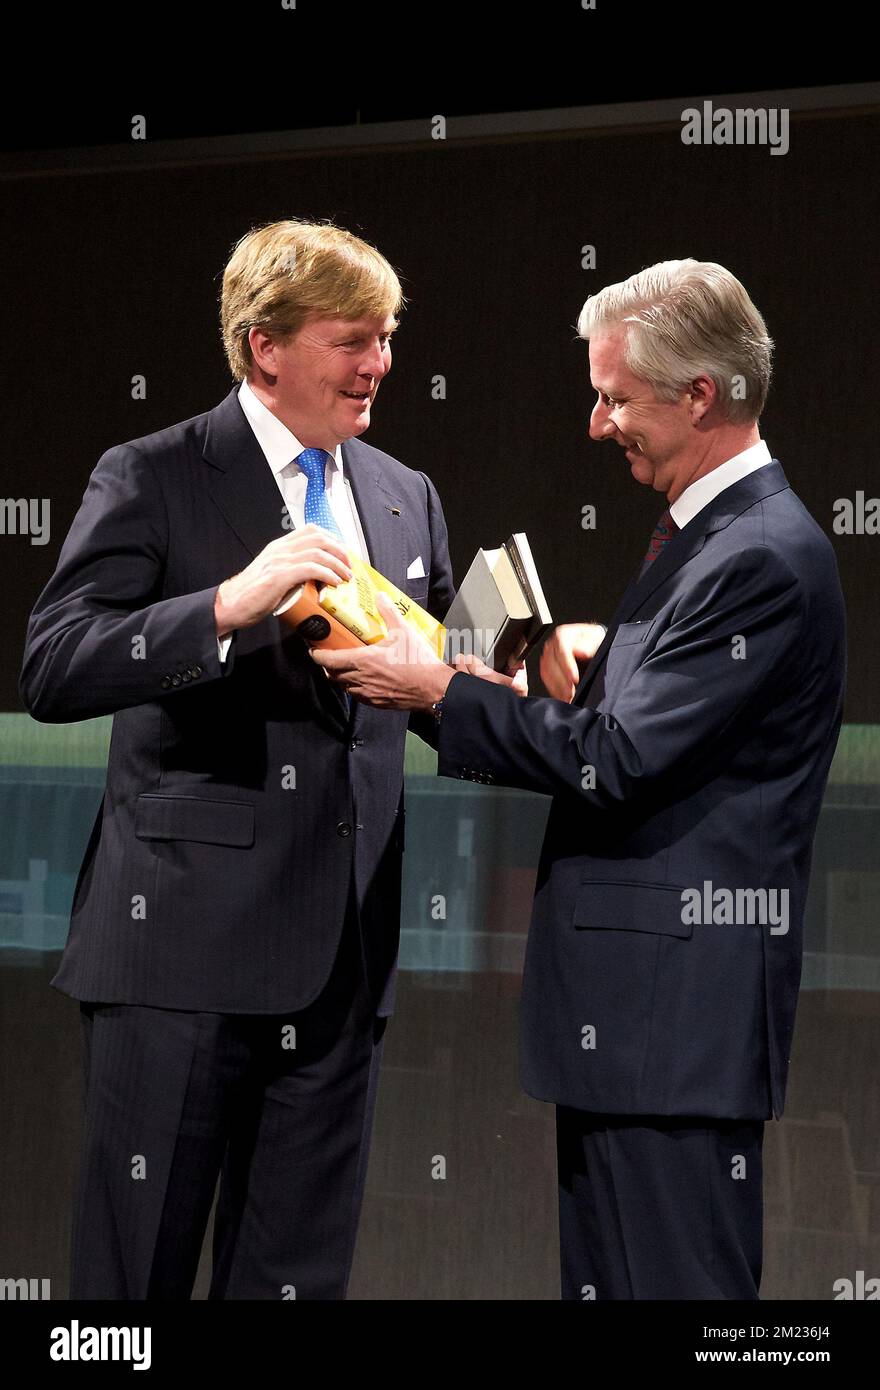 Dutch King Willem-Alexander and King Philippe - Filip of Belgium pictured at the opening day of 'Frankfurter Buchmesse' Dutch and Flemish pavillon by both countries royals, Tuesday 18 October 2016, in Frankfurt, Germany. Flanders and the Netherlands together will are the Guest of Honour at the Frankfurt Book Fair with the slogan 'Dit is wat we delen' - 'This is what we share' from 19 to 23 October. BELGA PHOTO NICOLAS MAETERLINCK Stock Photo